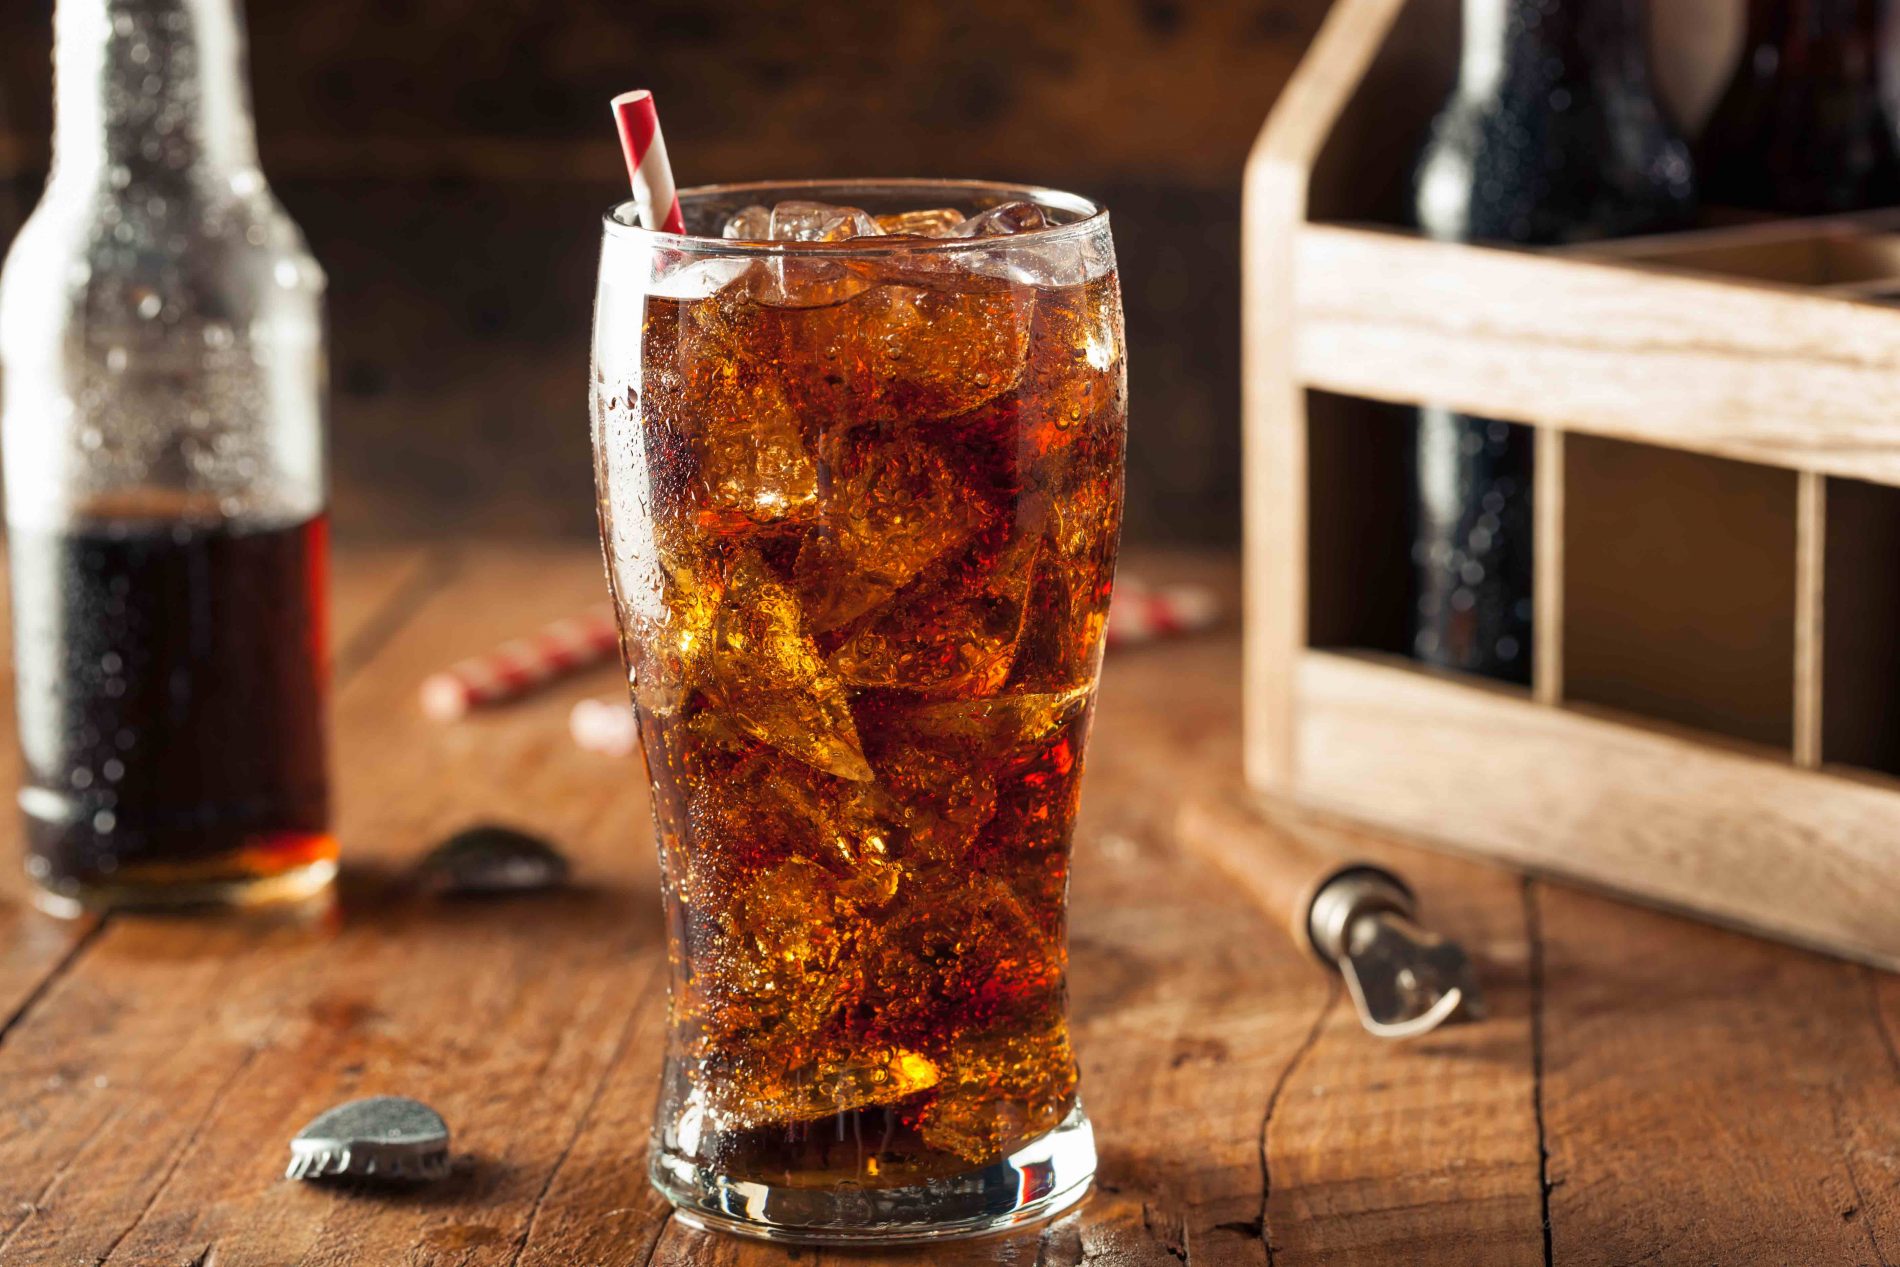 Drinking Diet Soda Increases Your Risk of Stroke 3-Fold